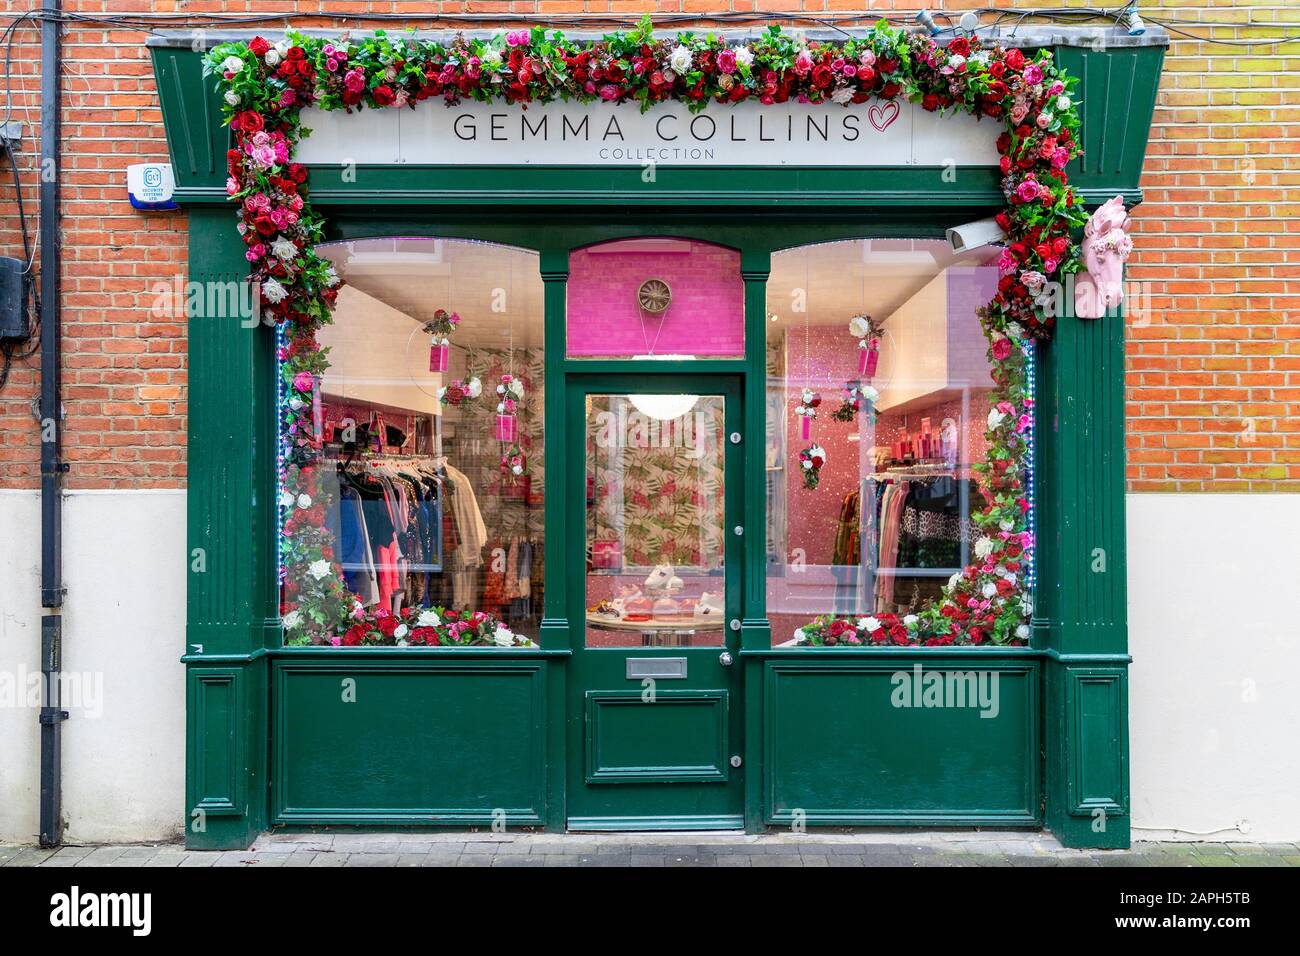 Gemma Collins boutique in Ropers Yard, Brentwood, Essex - January 2020 Stock Photo